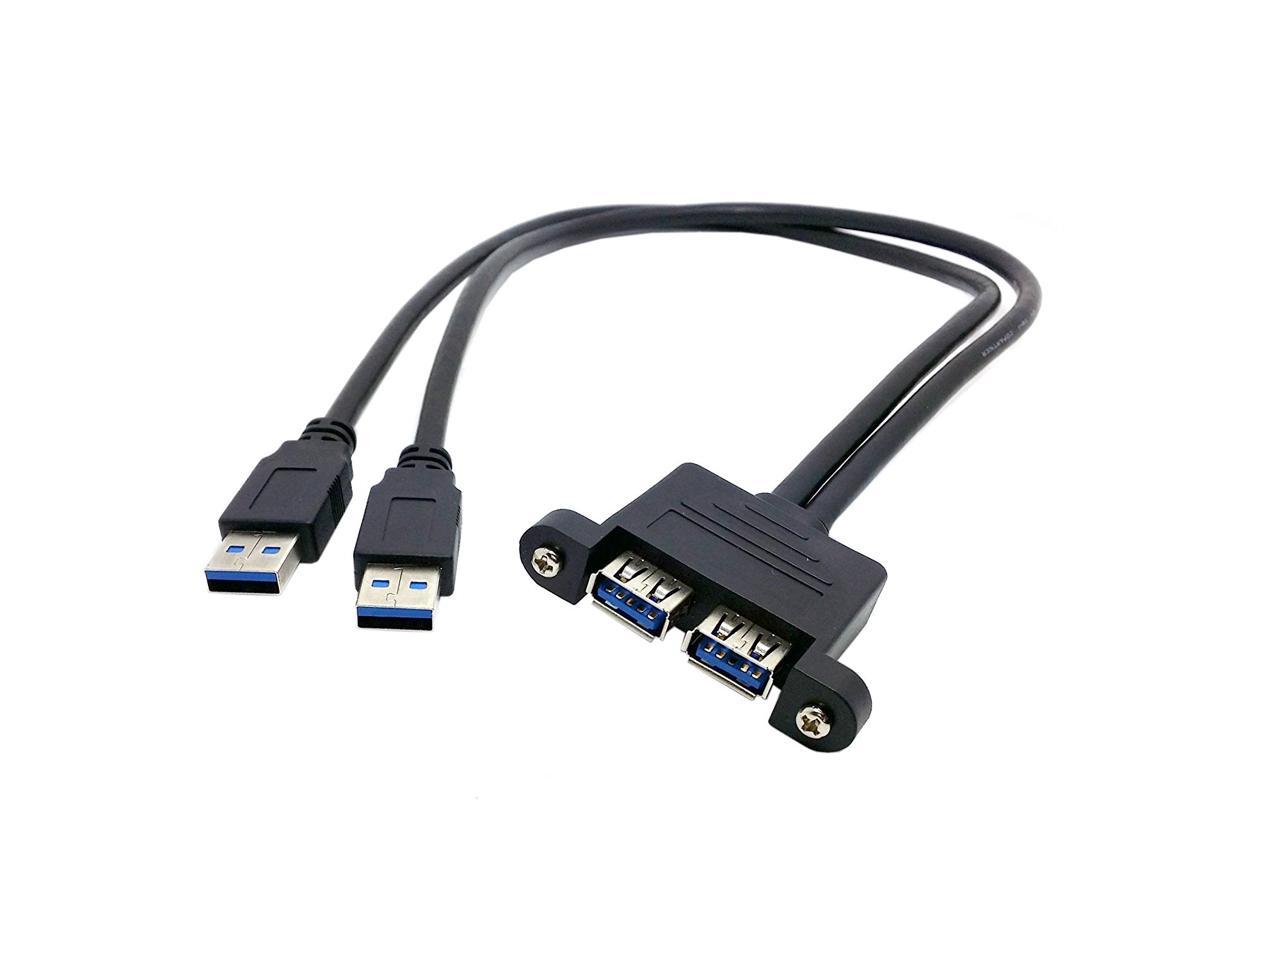 FP From OZ Quality 1PC 20CM USB 2.0 Male to USB 2.0 Female Extension Cable Cord 